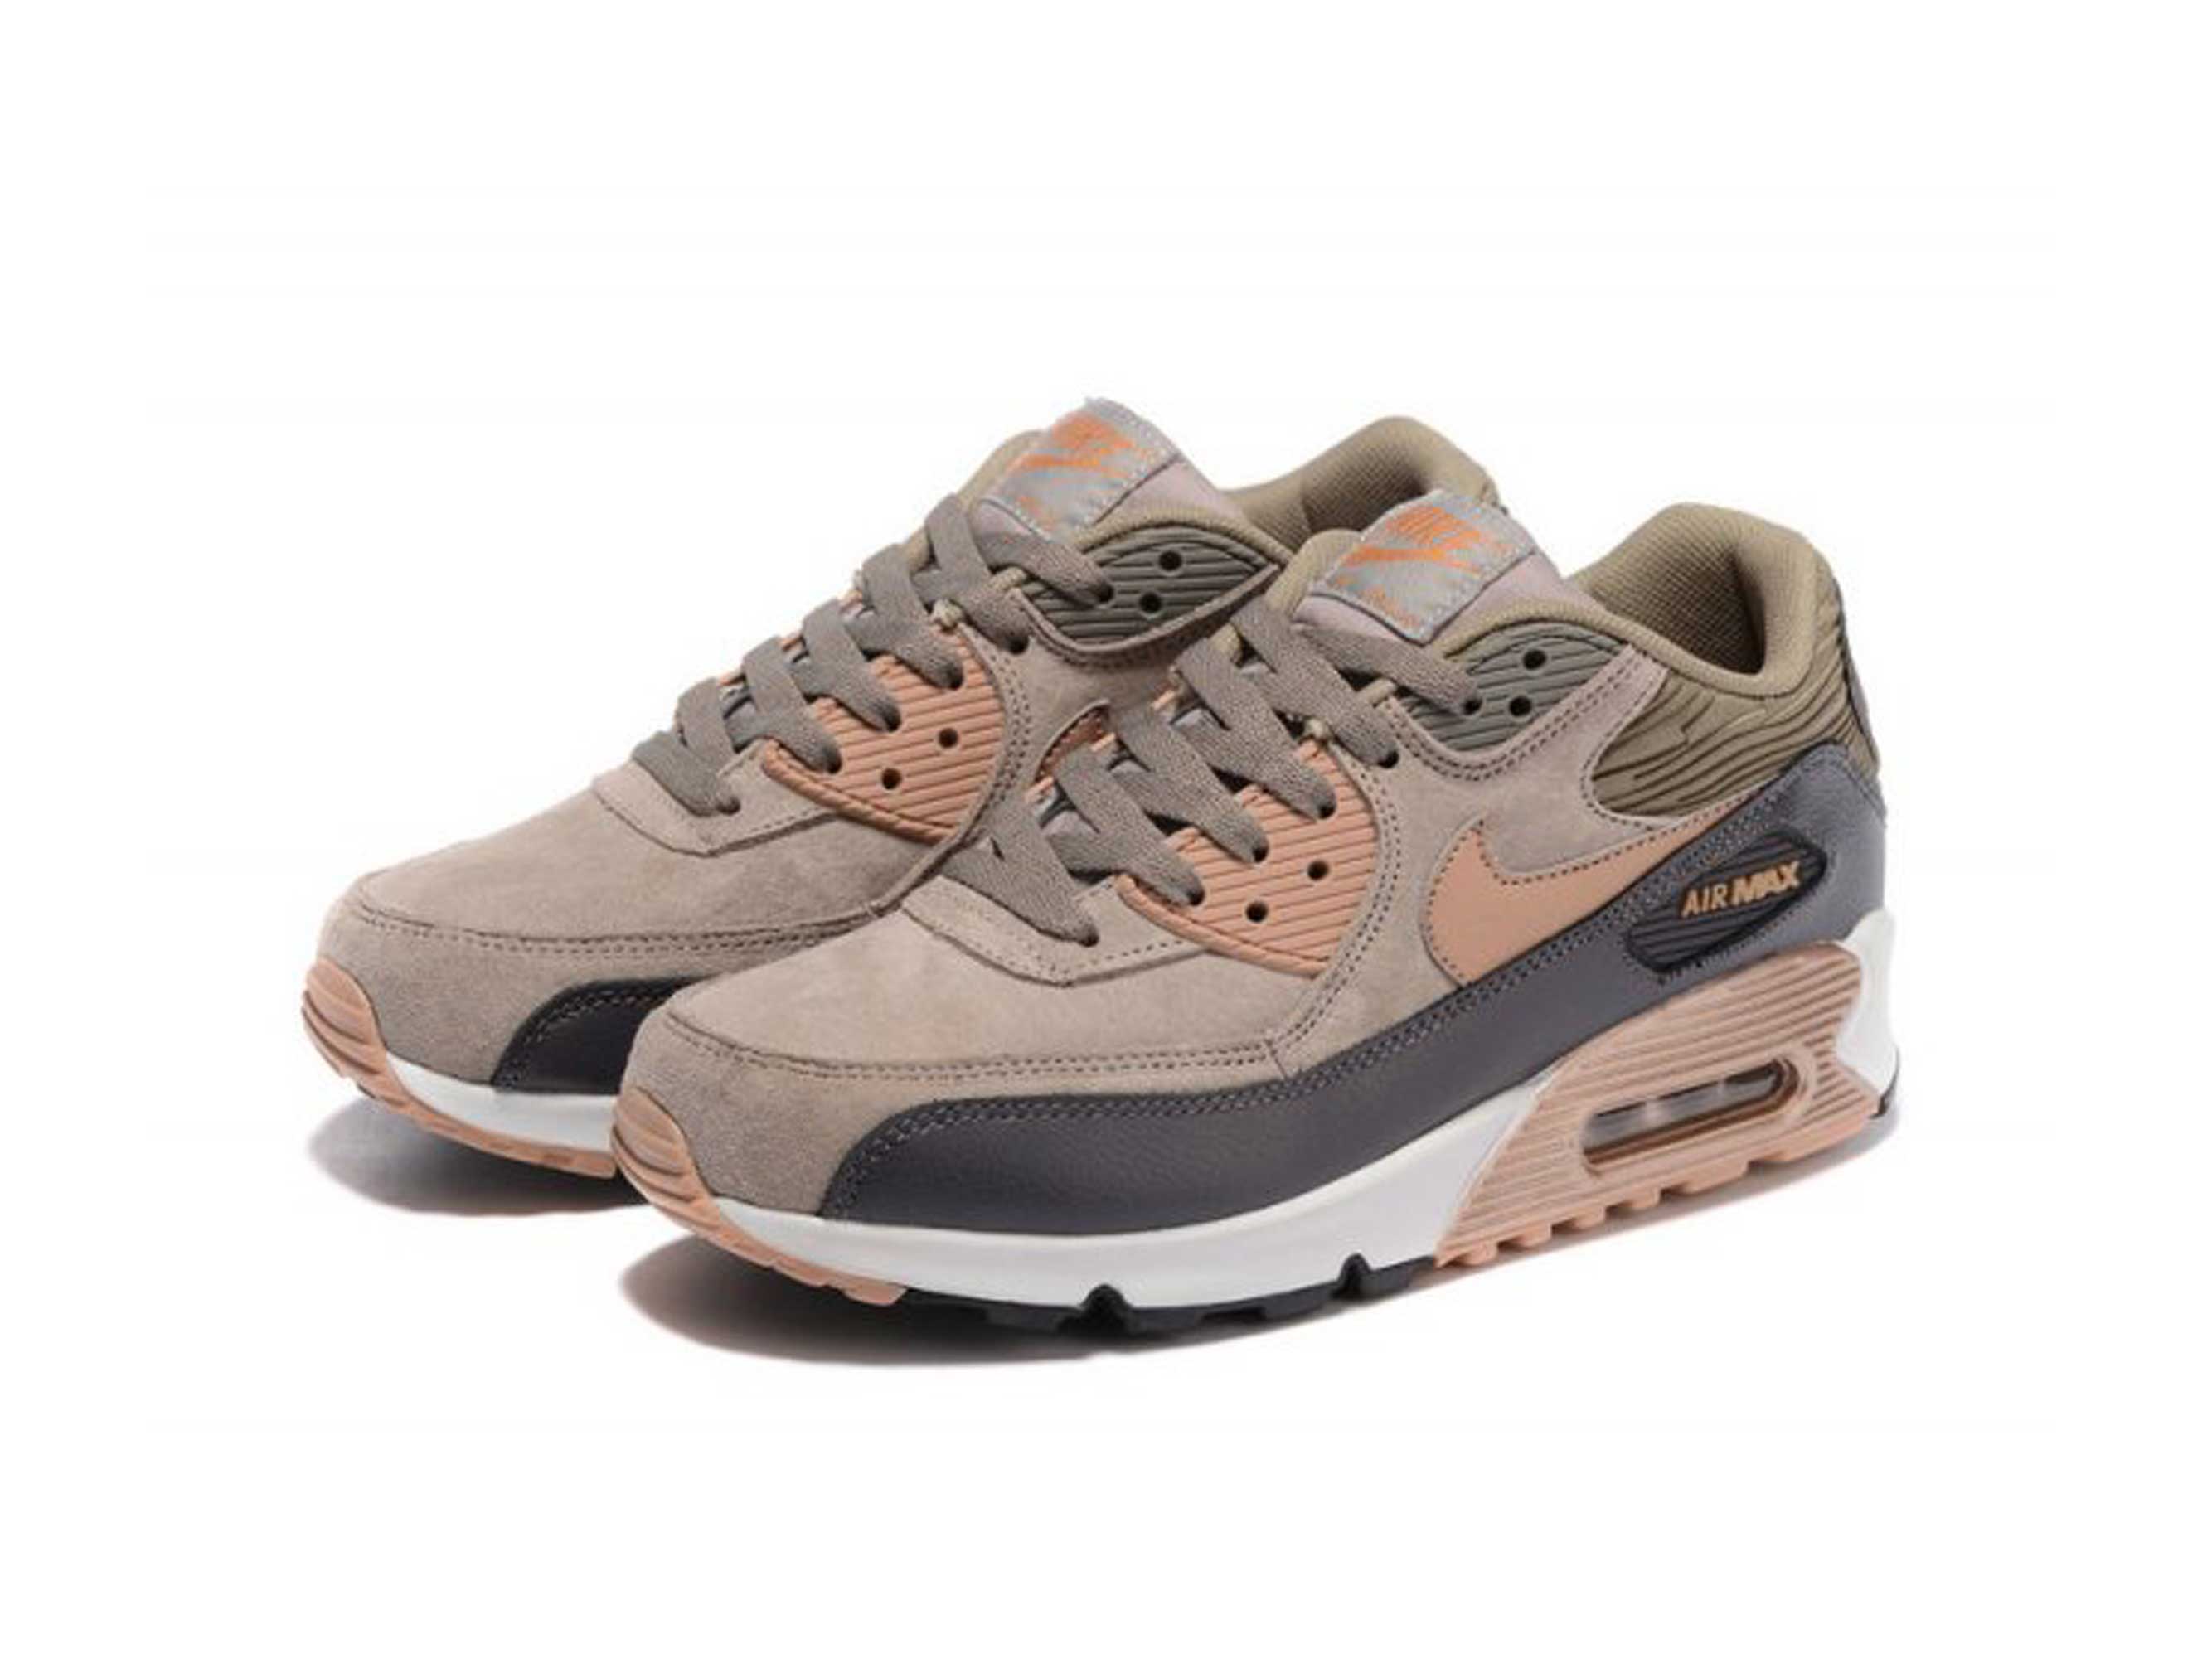 nike air max 90 leather bronze gold 